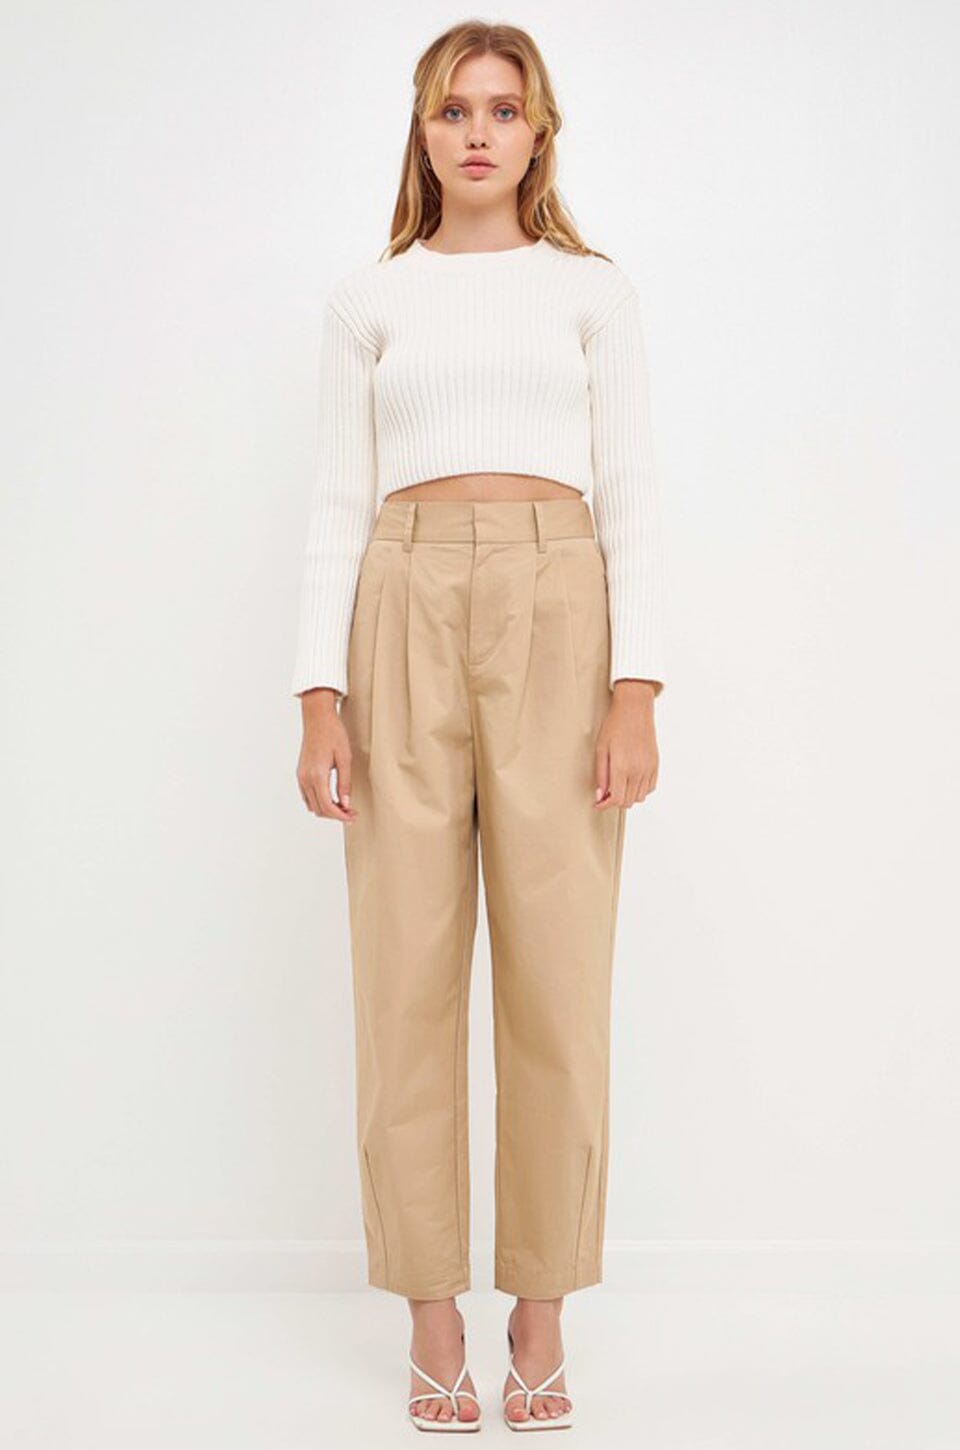 1.STATE Women's High-Waisted Pleated-Front Pants - Macy's